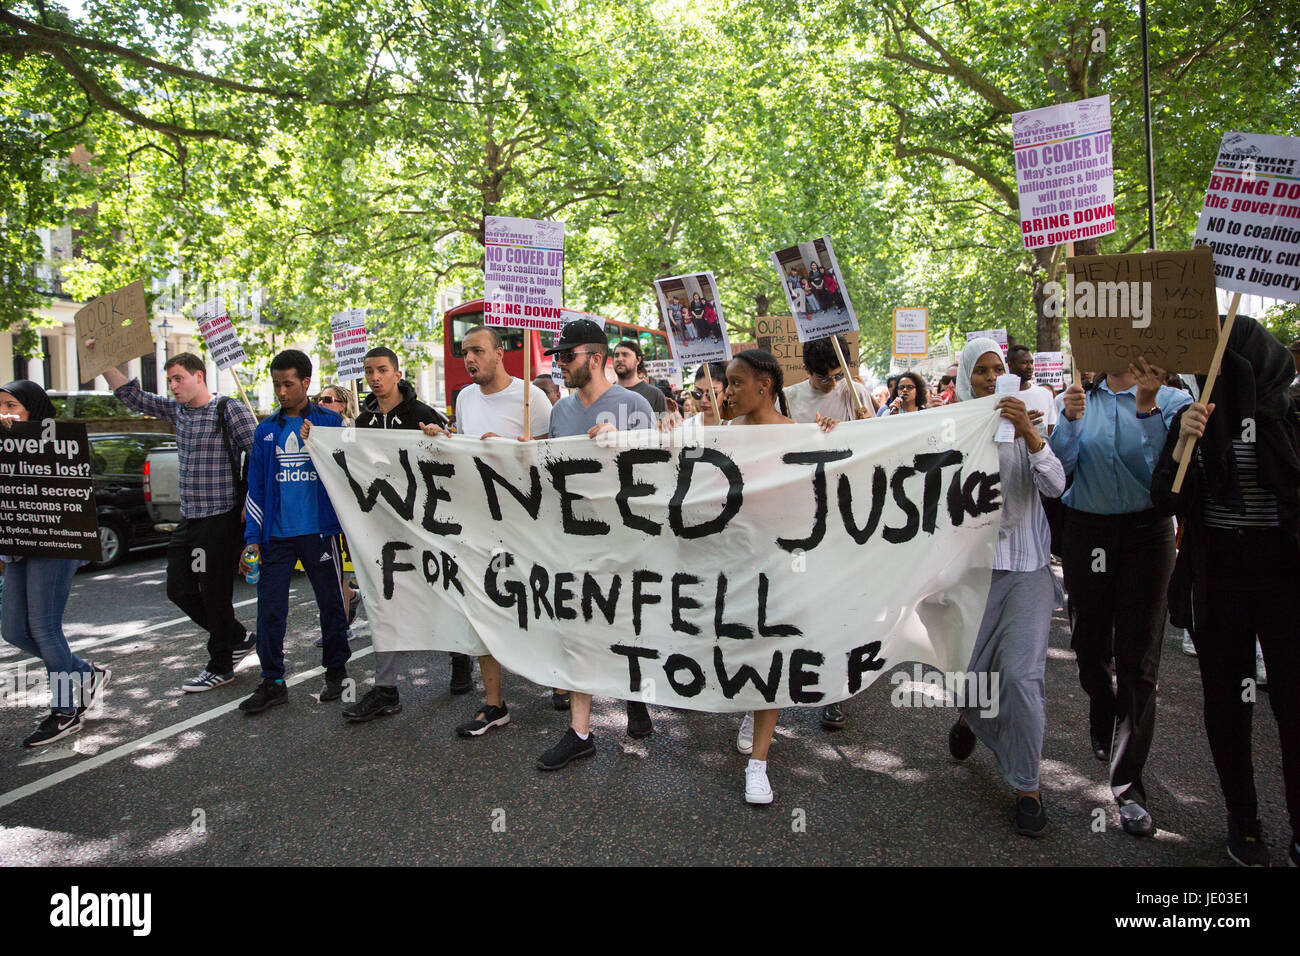 London, UK. 21st June, 2017. Activists from Movement For Justice By Any Means Necessary hold a 'Day of Rage' march from Shepherds Bush Green to Parliament Square to demand justice for those affected by the fire in the Grenfell Tower and to call for a change of government on the day of the Queen's Speech in Parliament. Credit: Mark Kerrison/Alamy Live News Stock Photo